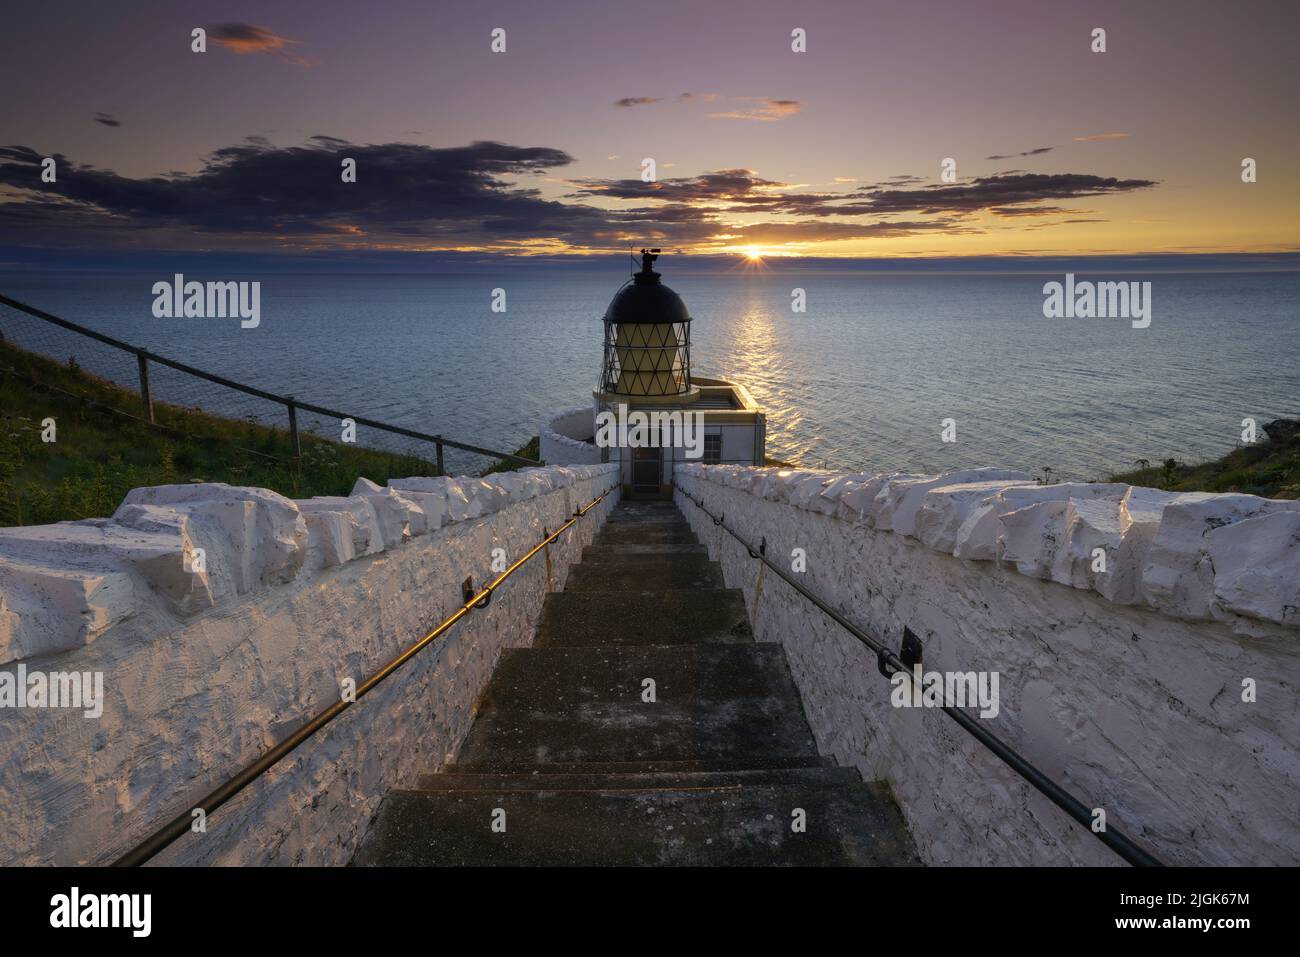 St Abbs lighthouse at sunrise with golden hour light. located in Berwickshire, Scottish borders, Scotland. Stock Photo